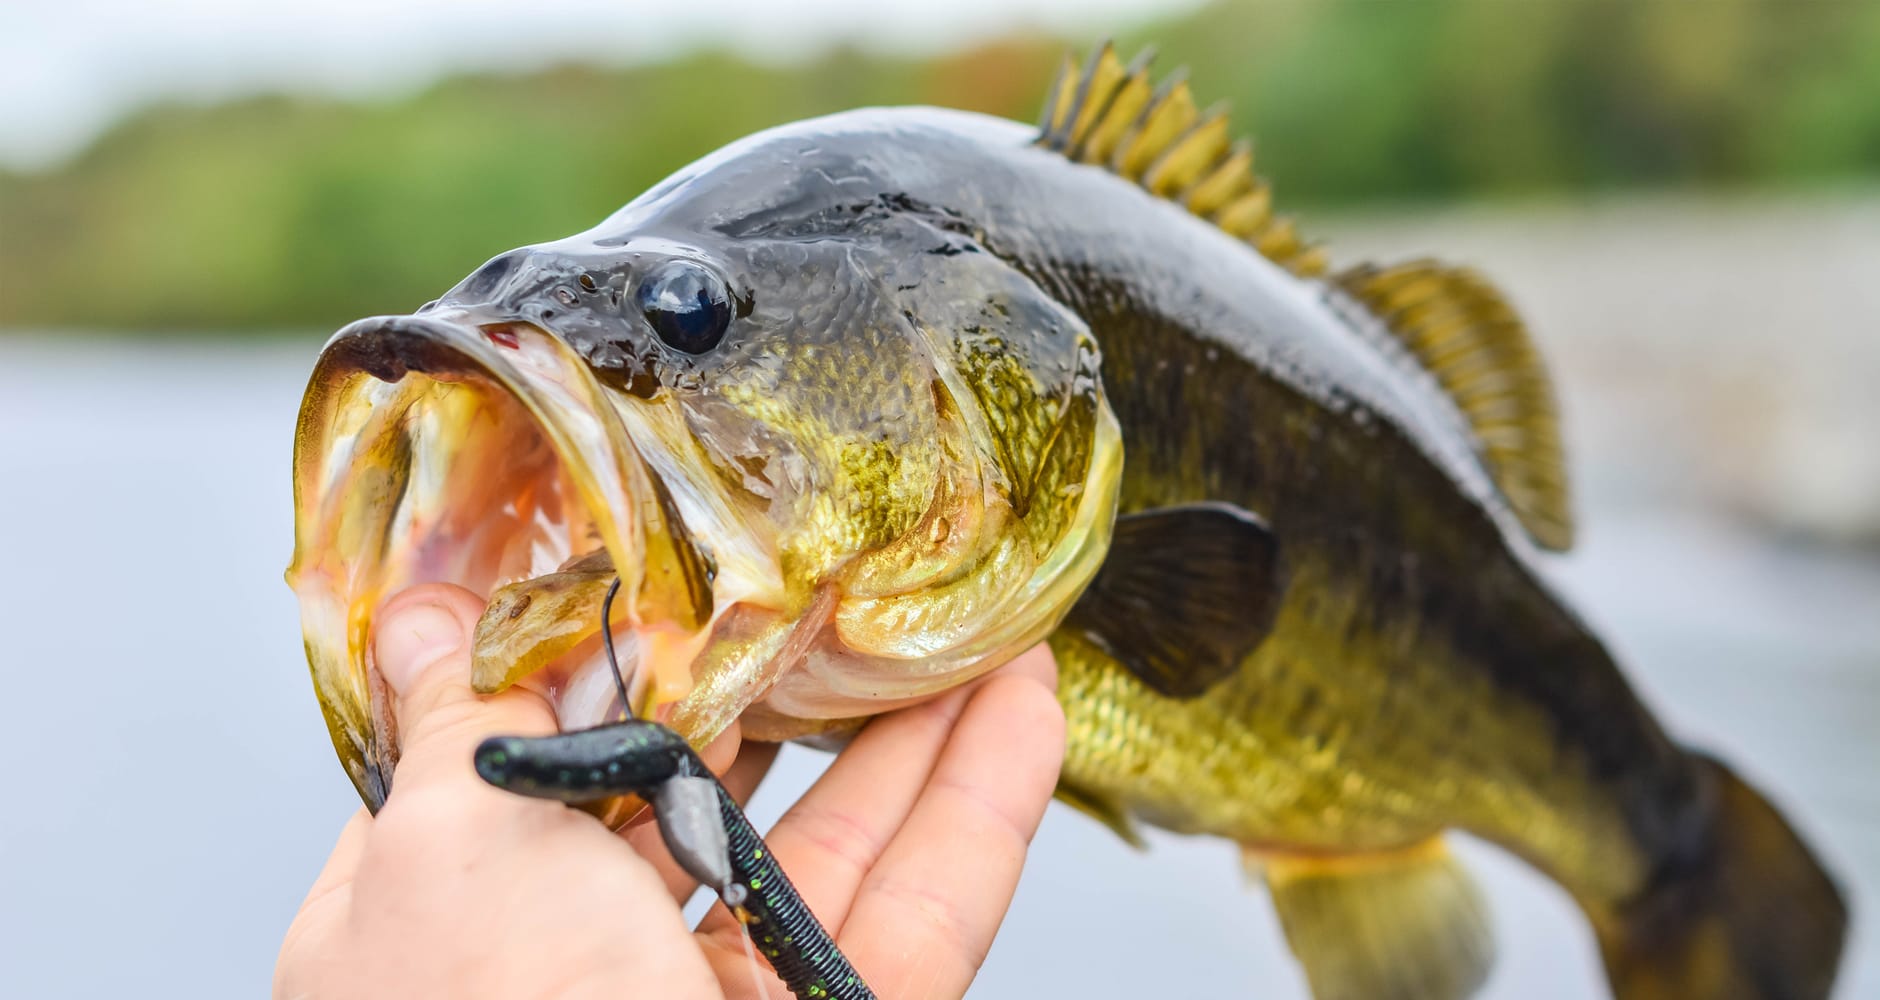 Largemouth bass are a prized favorite catch in the Southeast region of the USA.